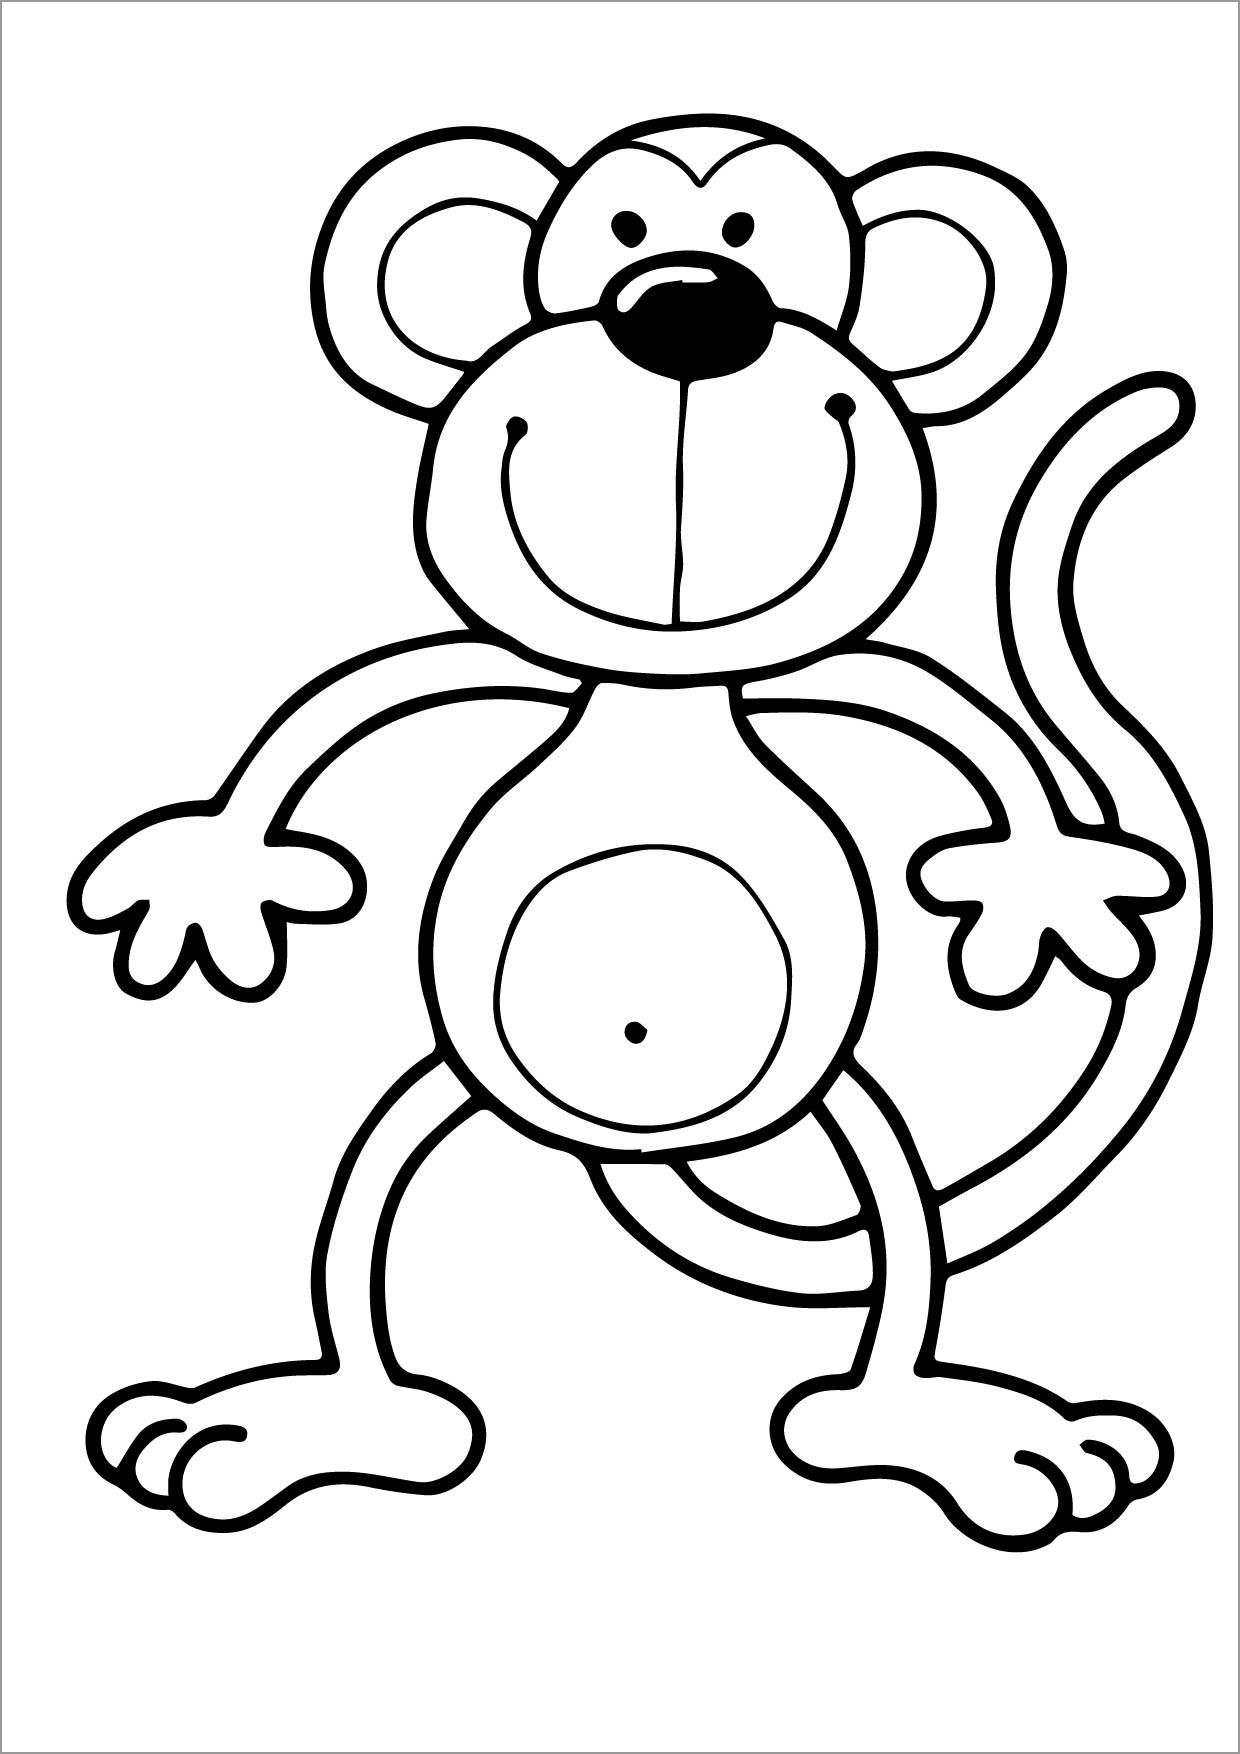 Monkey Coloring Pages for Preschoolers